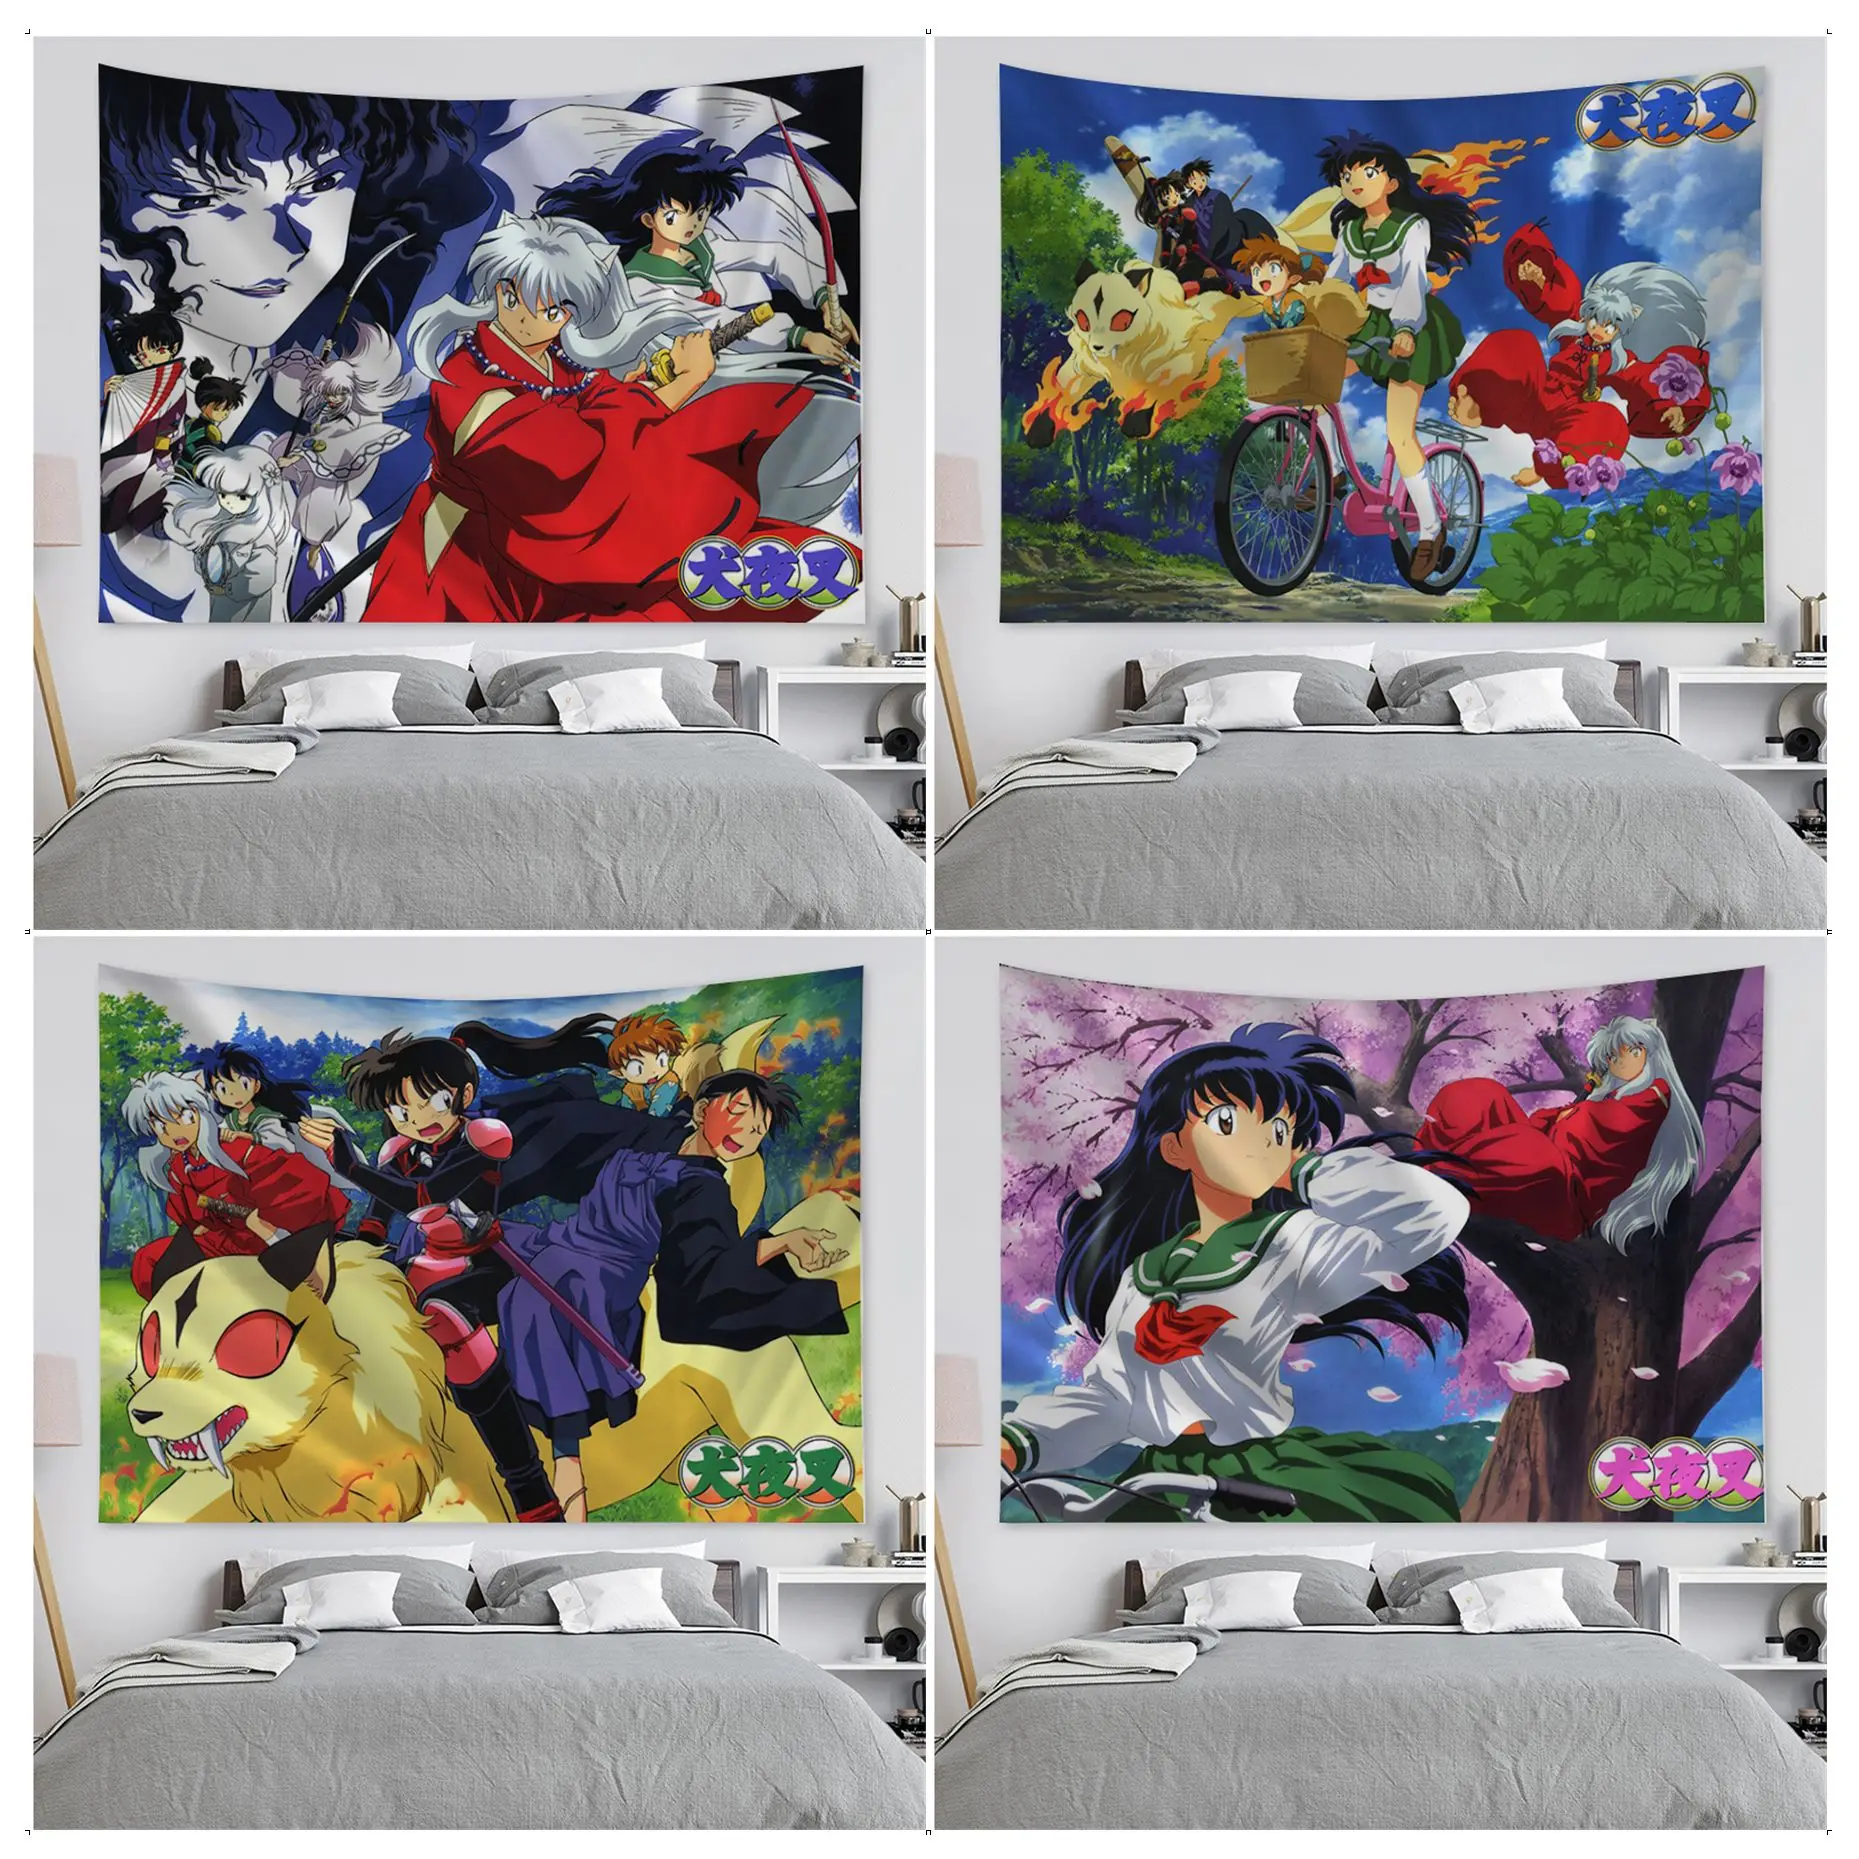 

Anime Inuyasha Tapestry Chart Tapestry Home Decoration hippie bohemian decoration divination Wall Hanging Home Decor